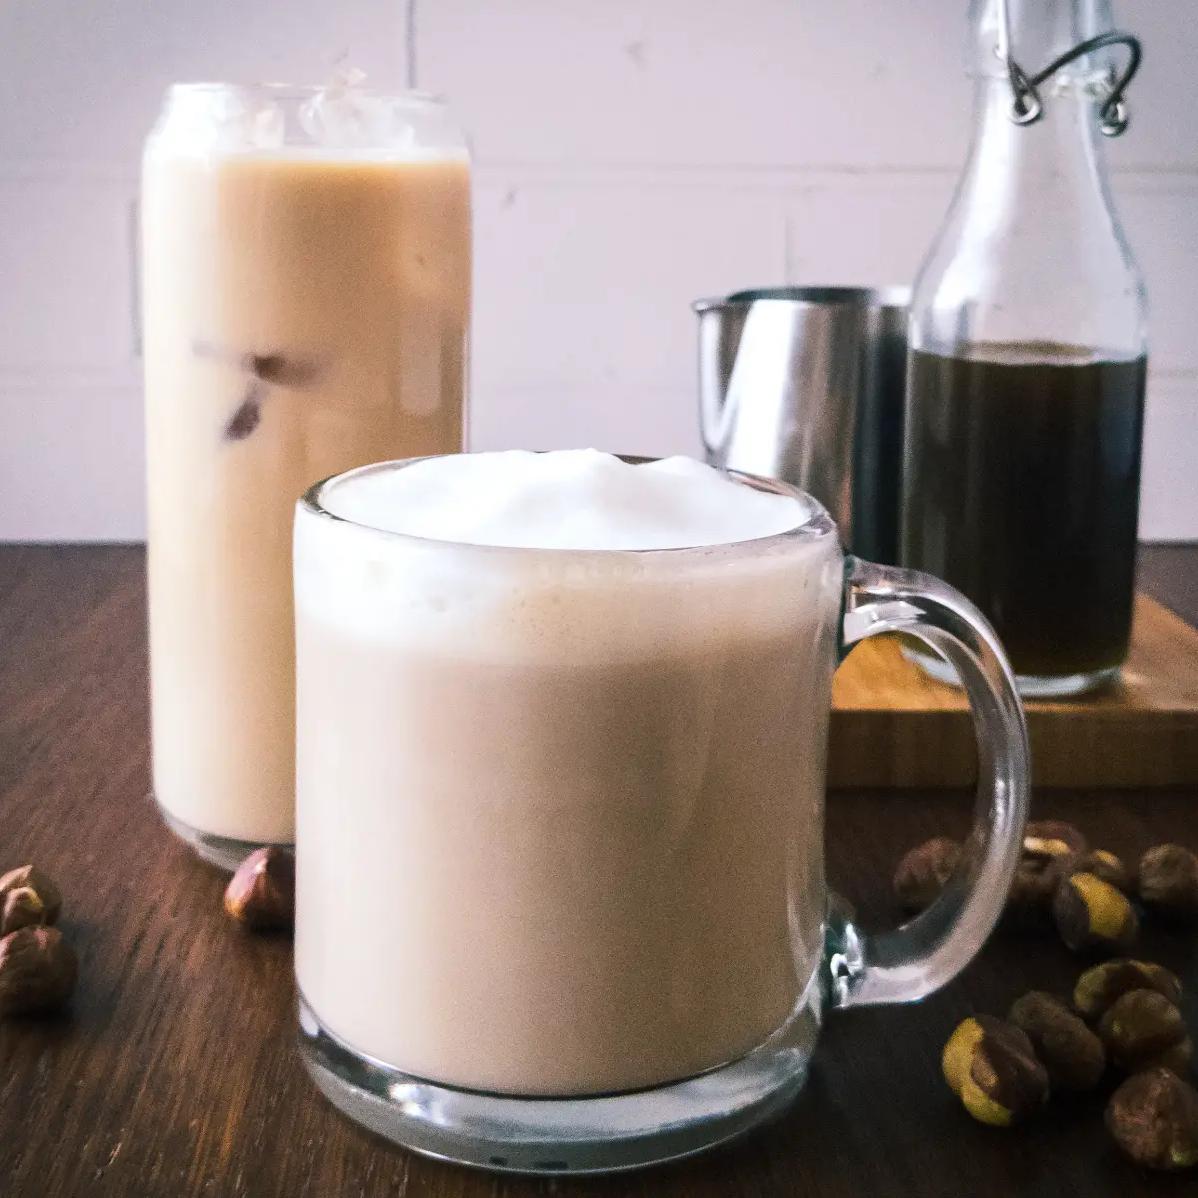  Make every day an indulgent one with our Hazelnut Divinity Latte.